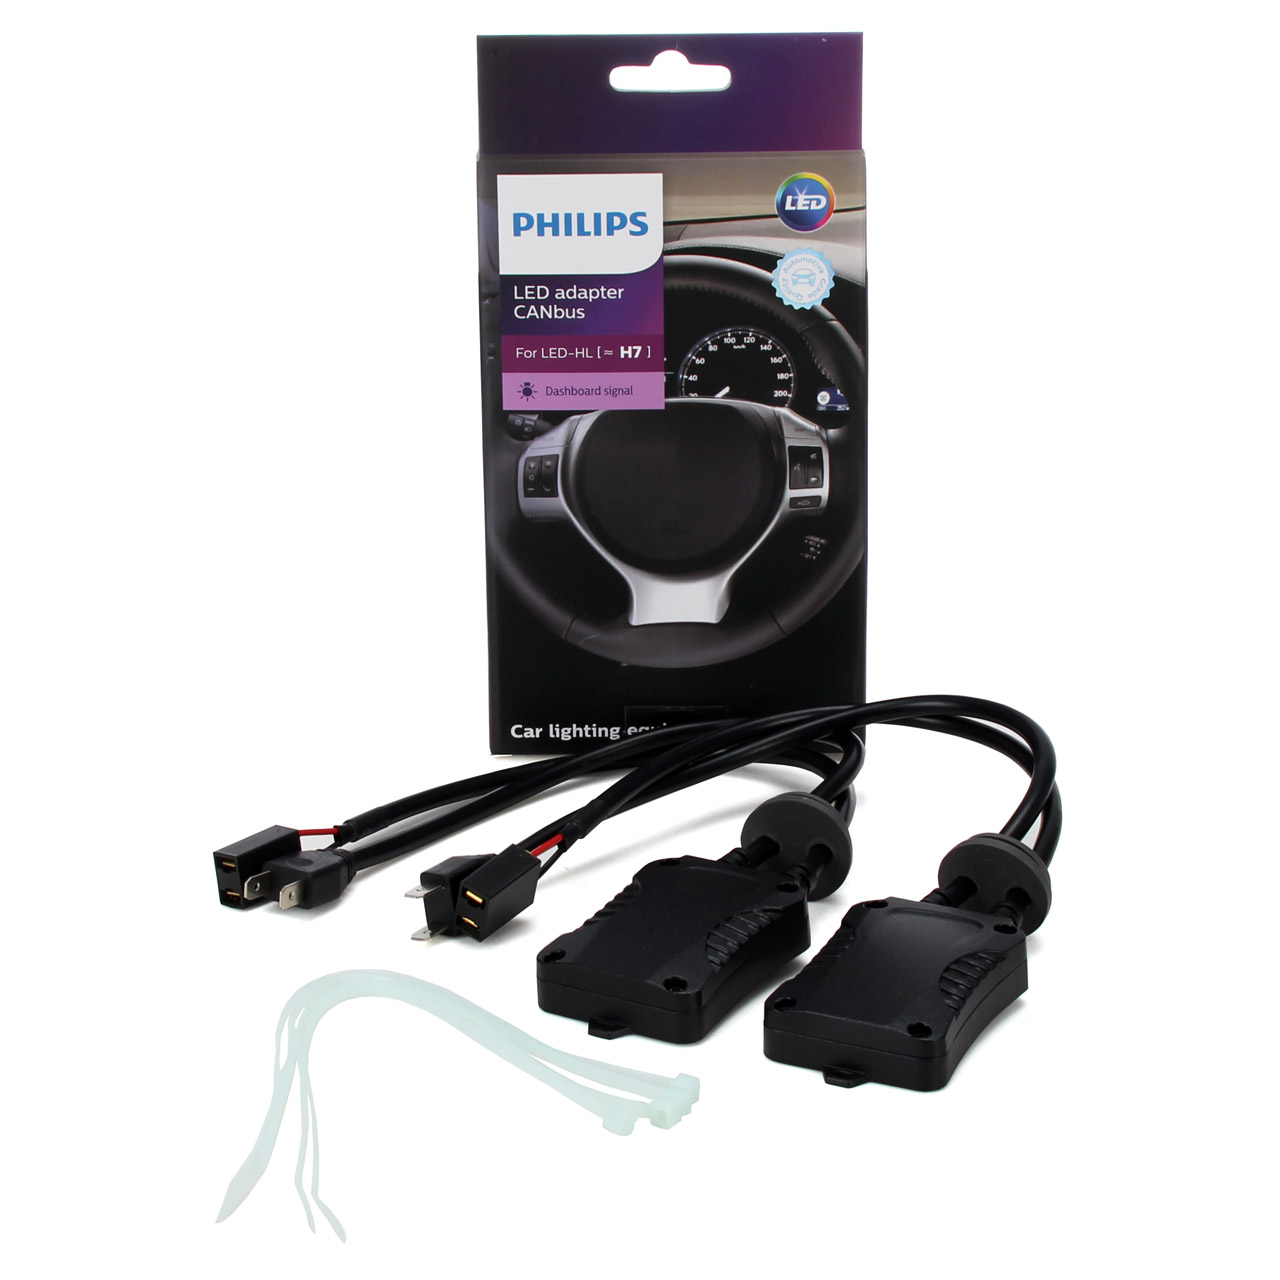 PHILIPS 18952C2 LED Scheinwerfer CANBUS Adapter für Ultinon Pro6000 H7 LED